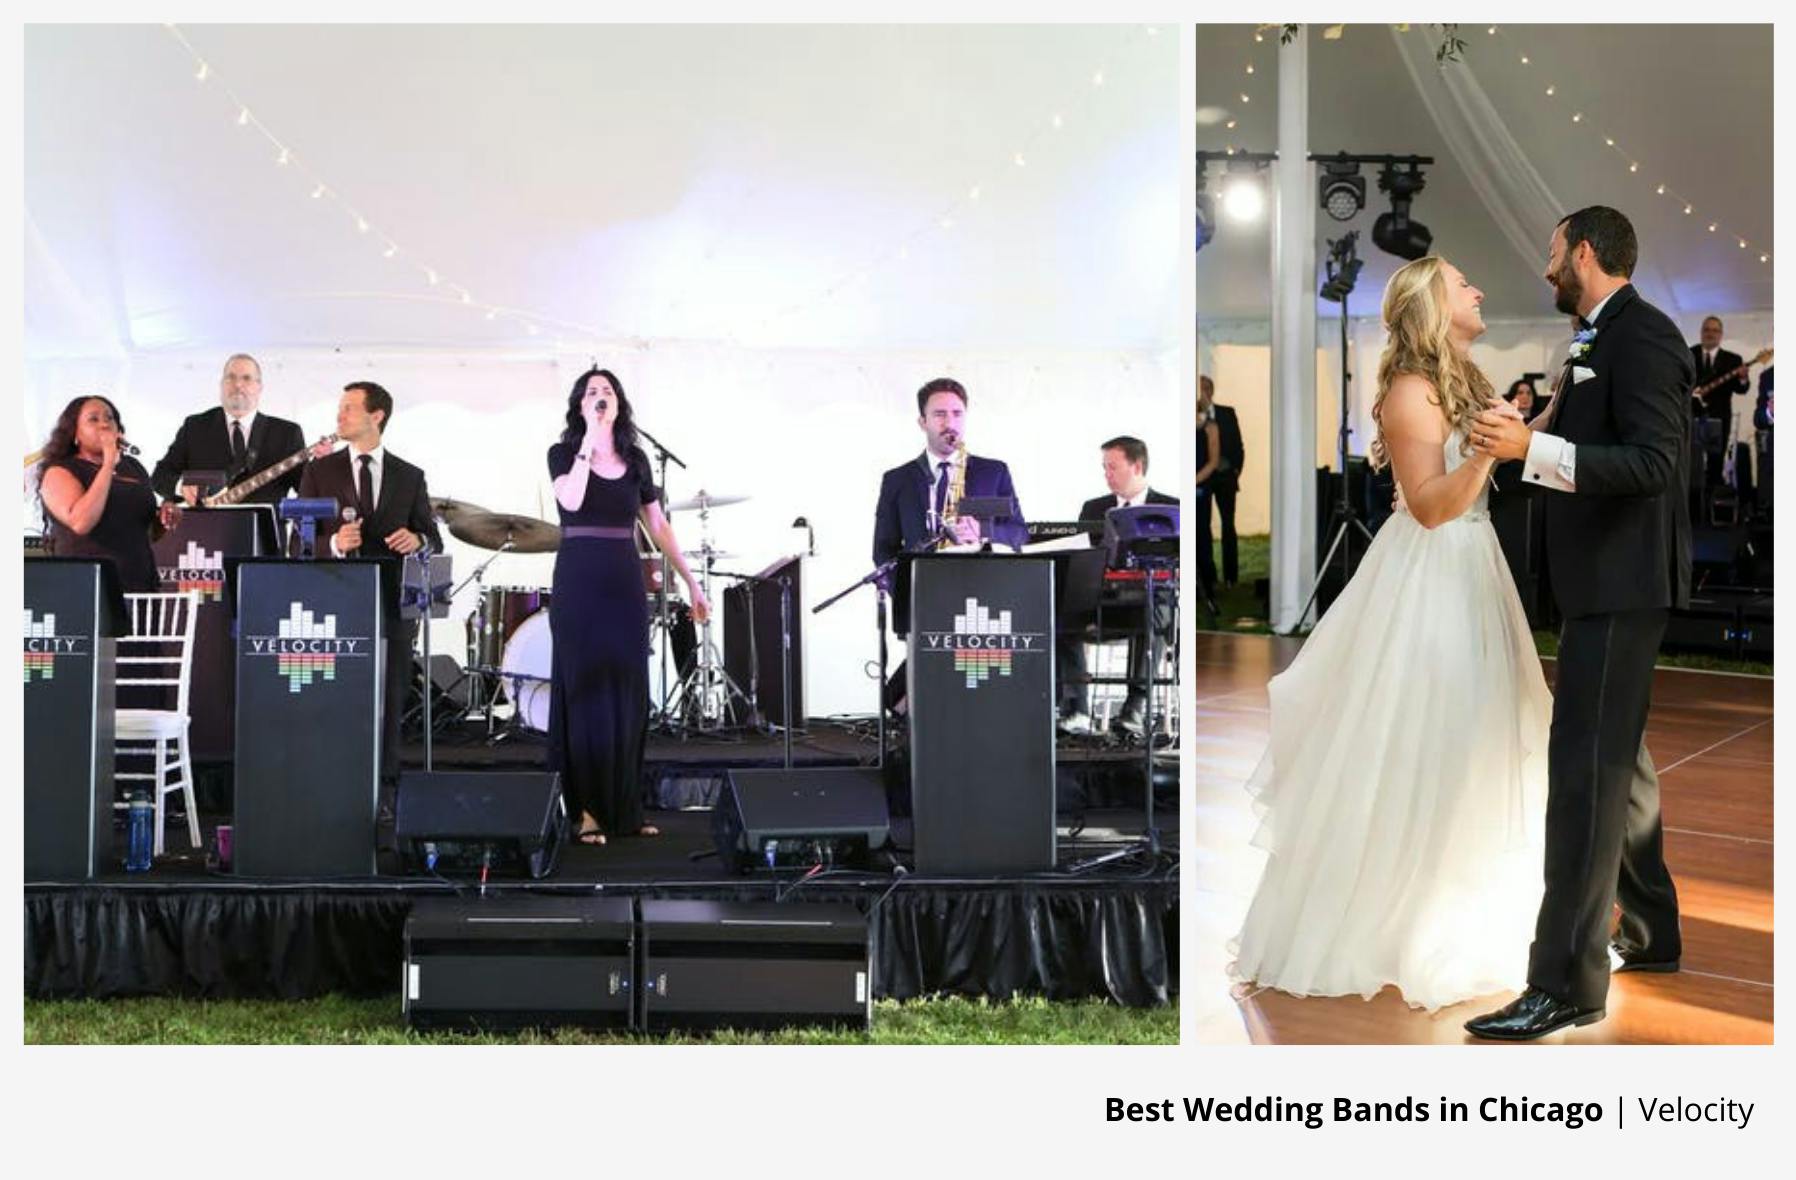 Velocity Best Wedding Band Chicago Performing on Stage For Bride and Groom First Dance | PartySlate